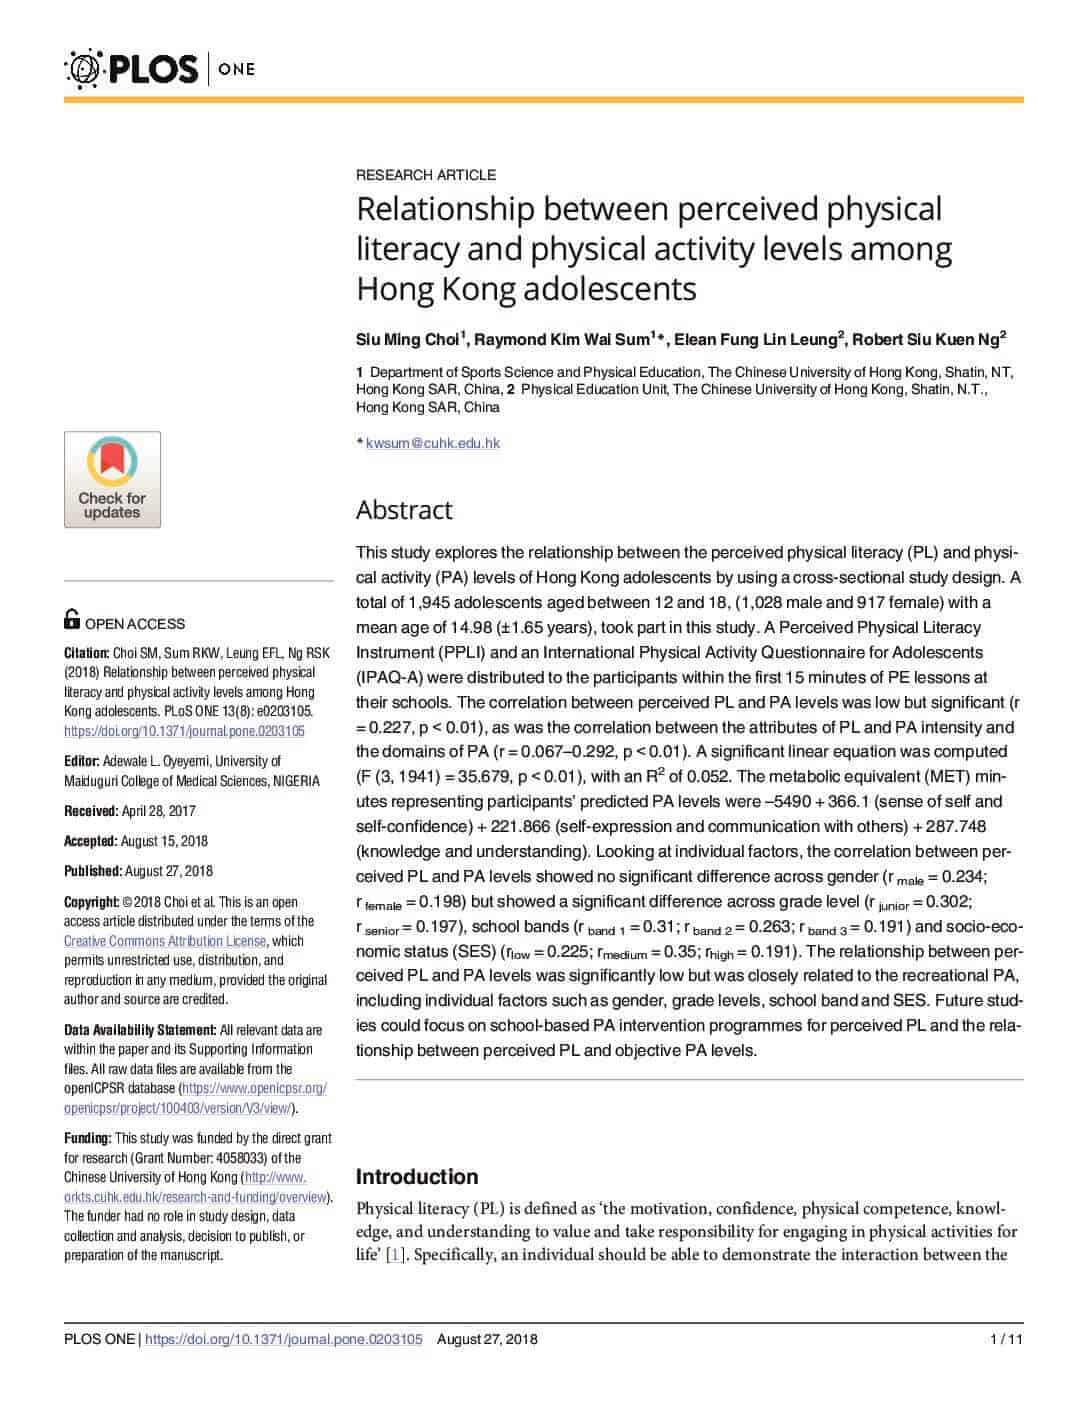 Relationship between perceived physical literacy and physical activity levels among Hong Kong adolescents